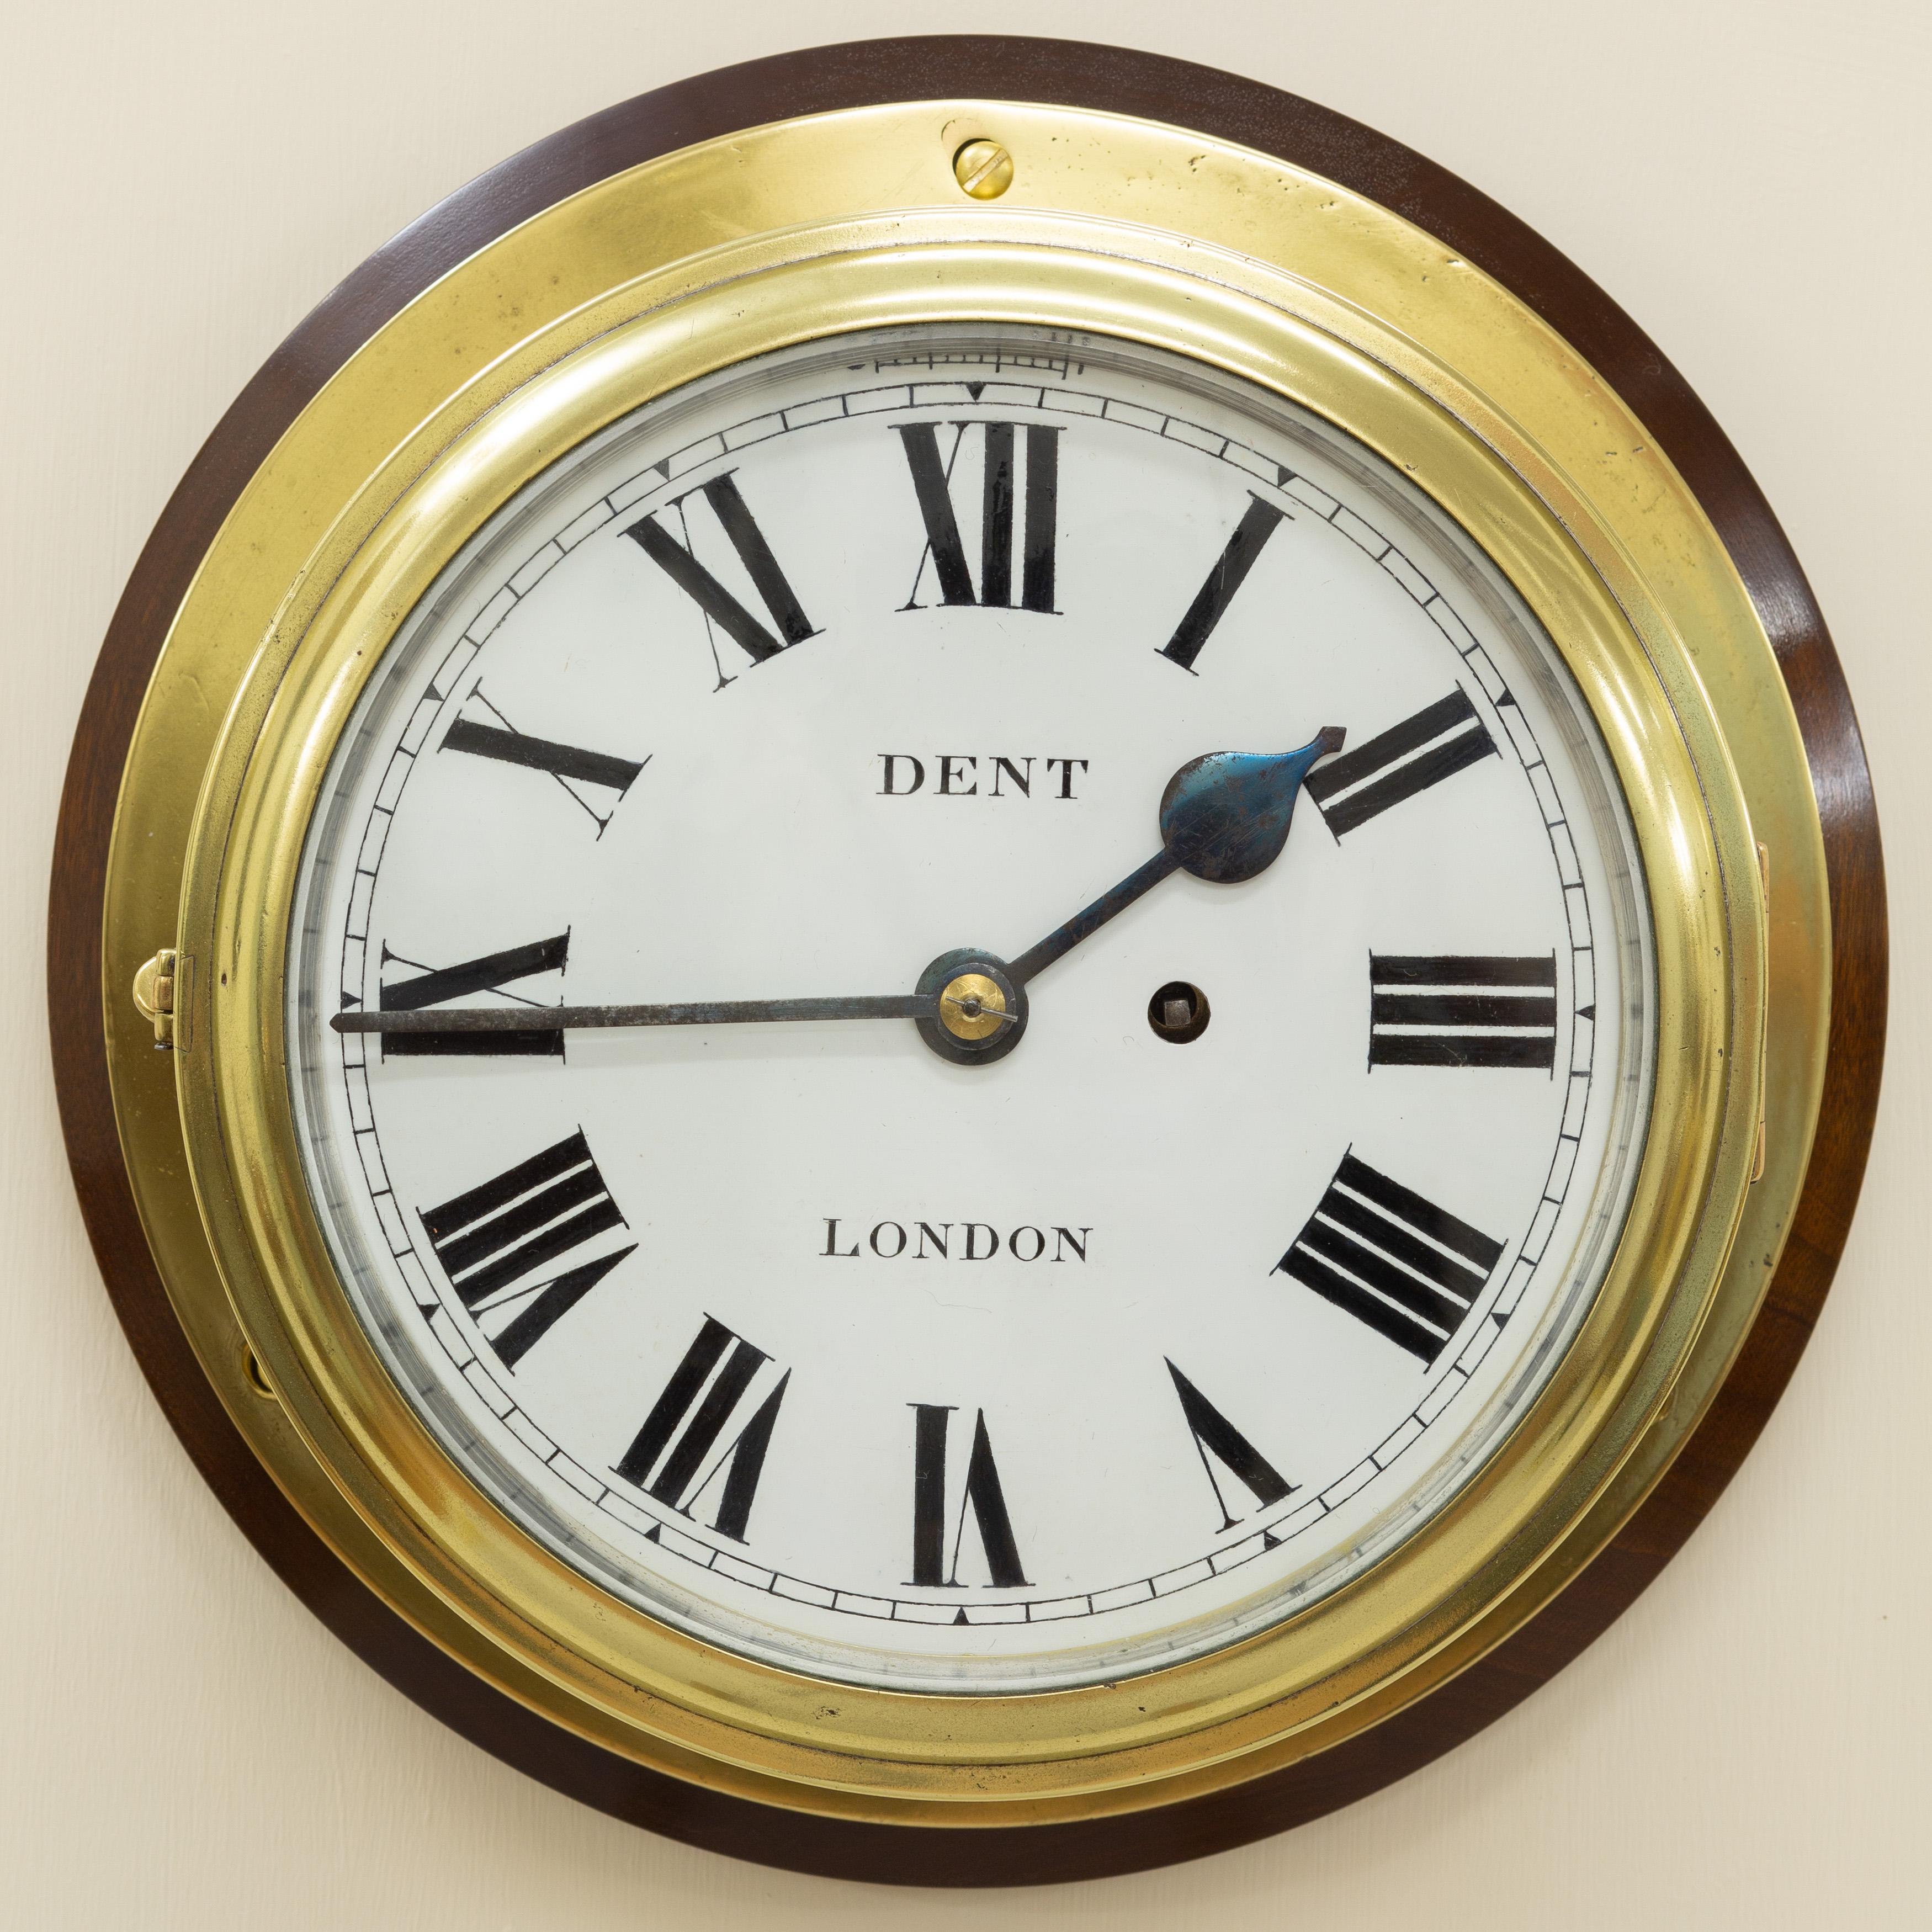 Large brass ships bulkhead clock.


Eight inch enamel dial with Roman numerals, ‘blued’ steel hands and signed ‘Dent, London’.

Heavy cast brass bezel with side ‘keep’ and bevelled glass.

Substantial eight day chain Fusee movement with large